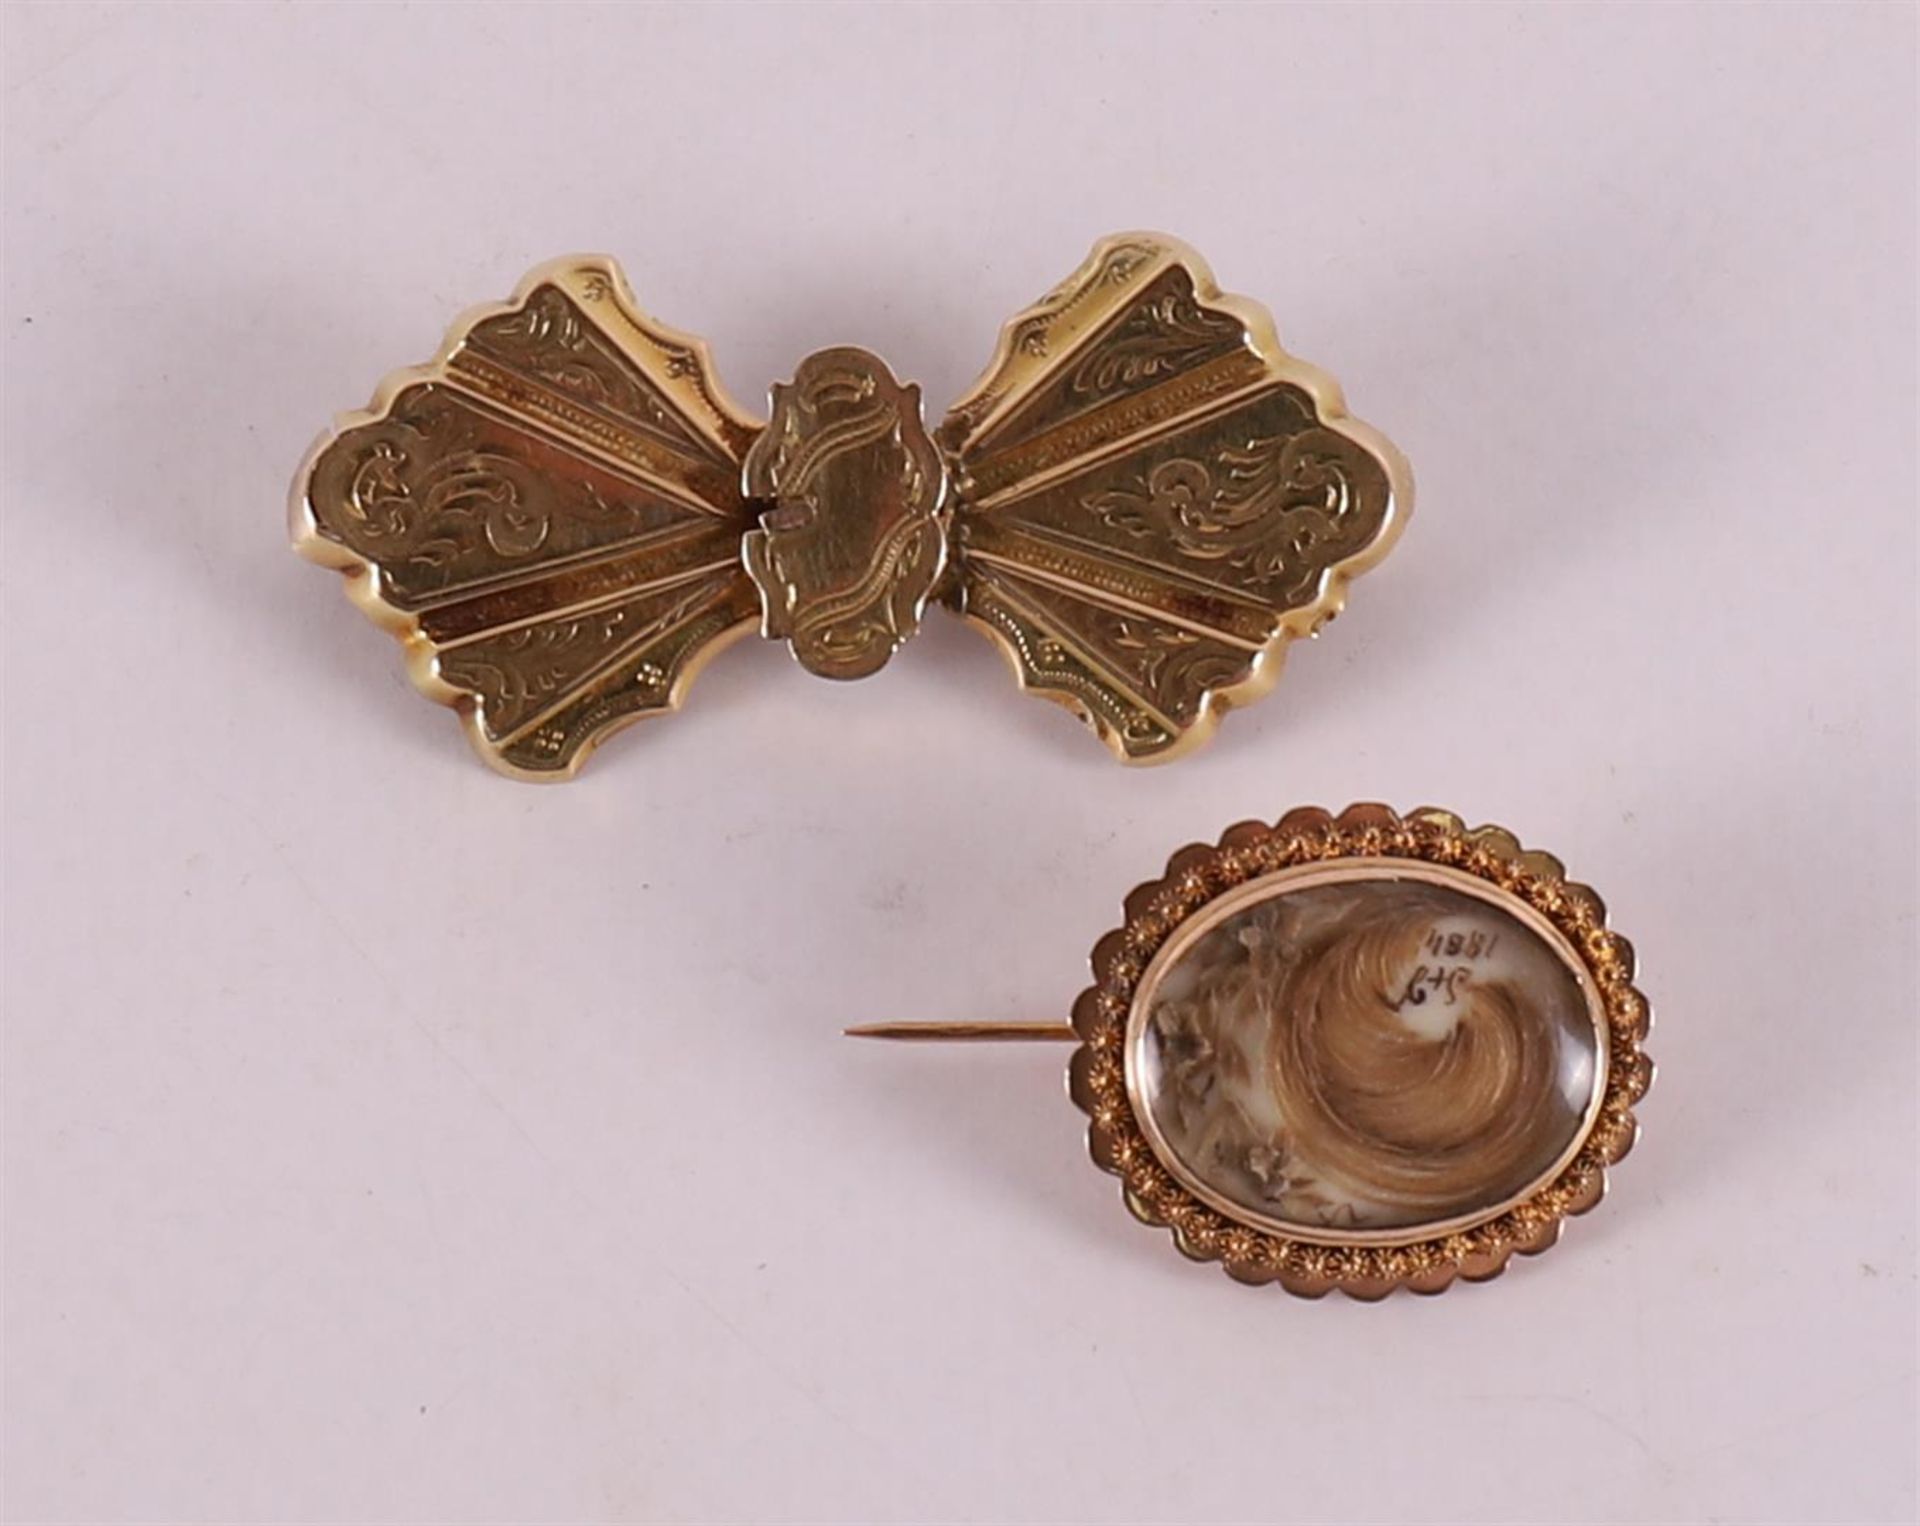 A 14 kt 585/1000 gold brooch with hair, regional costume dated 1884.